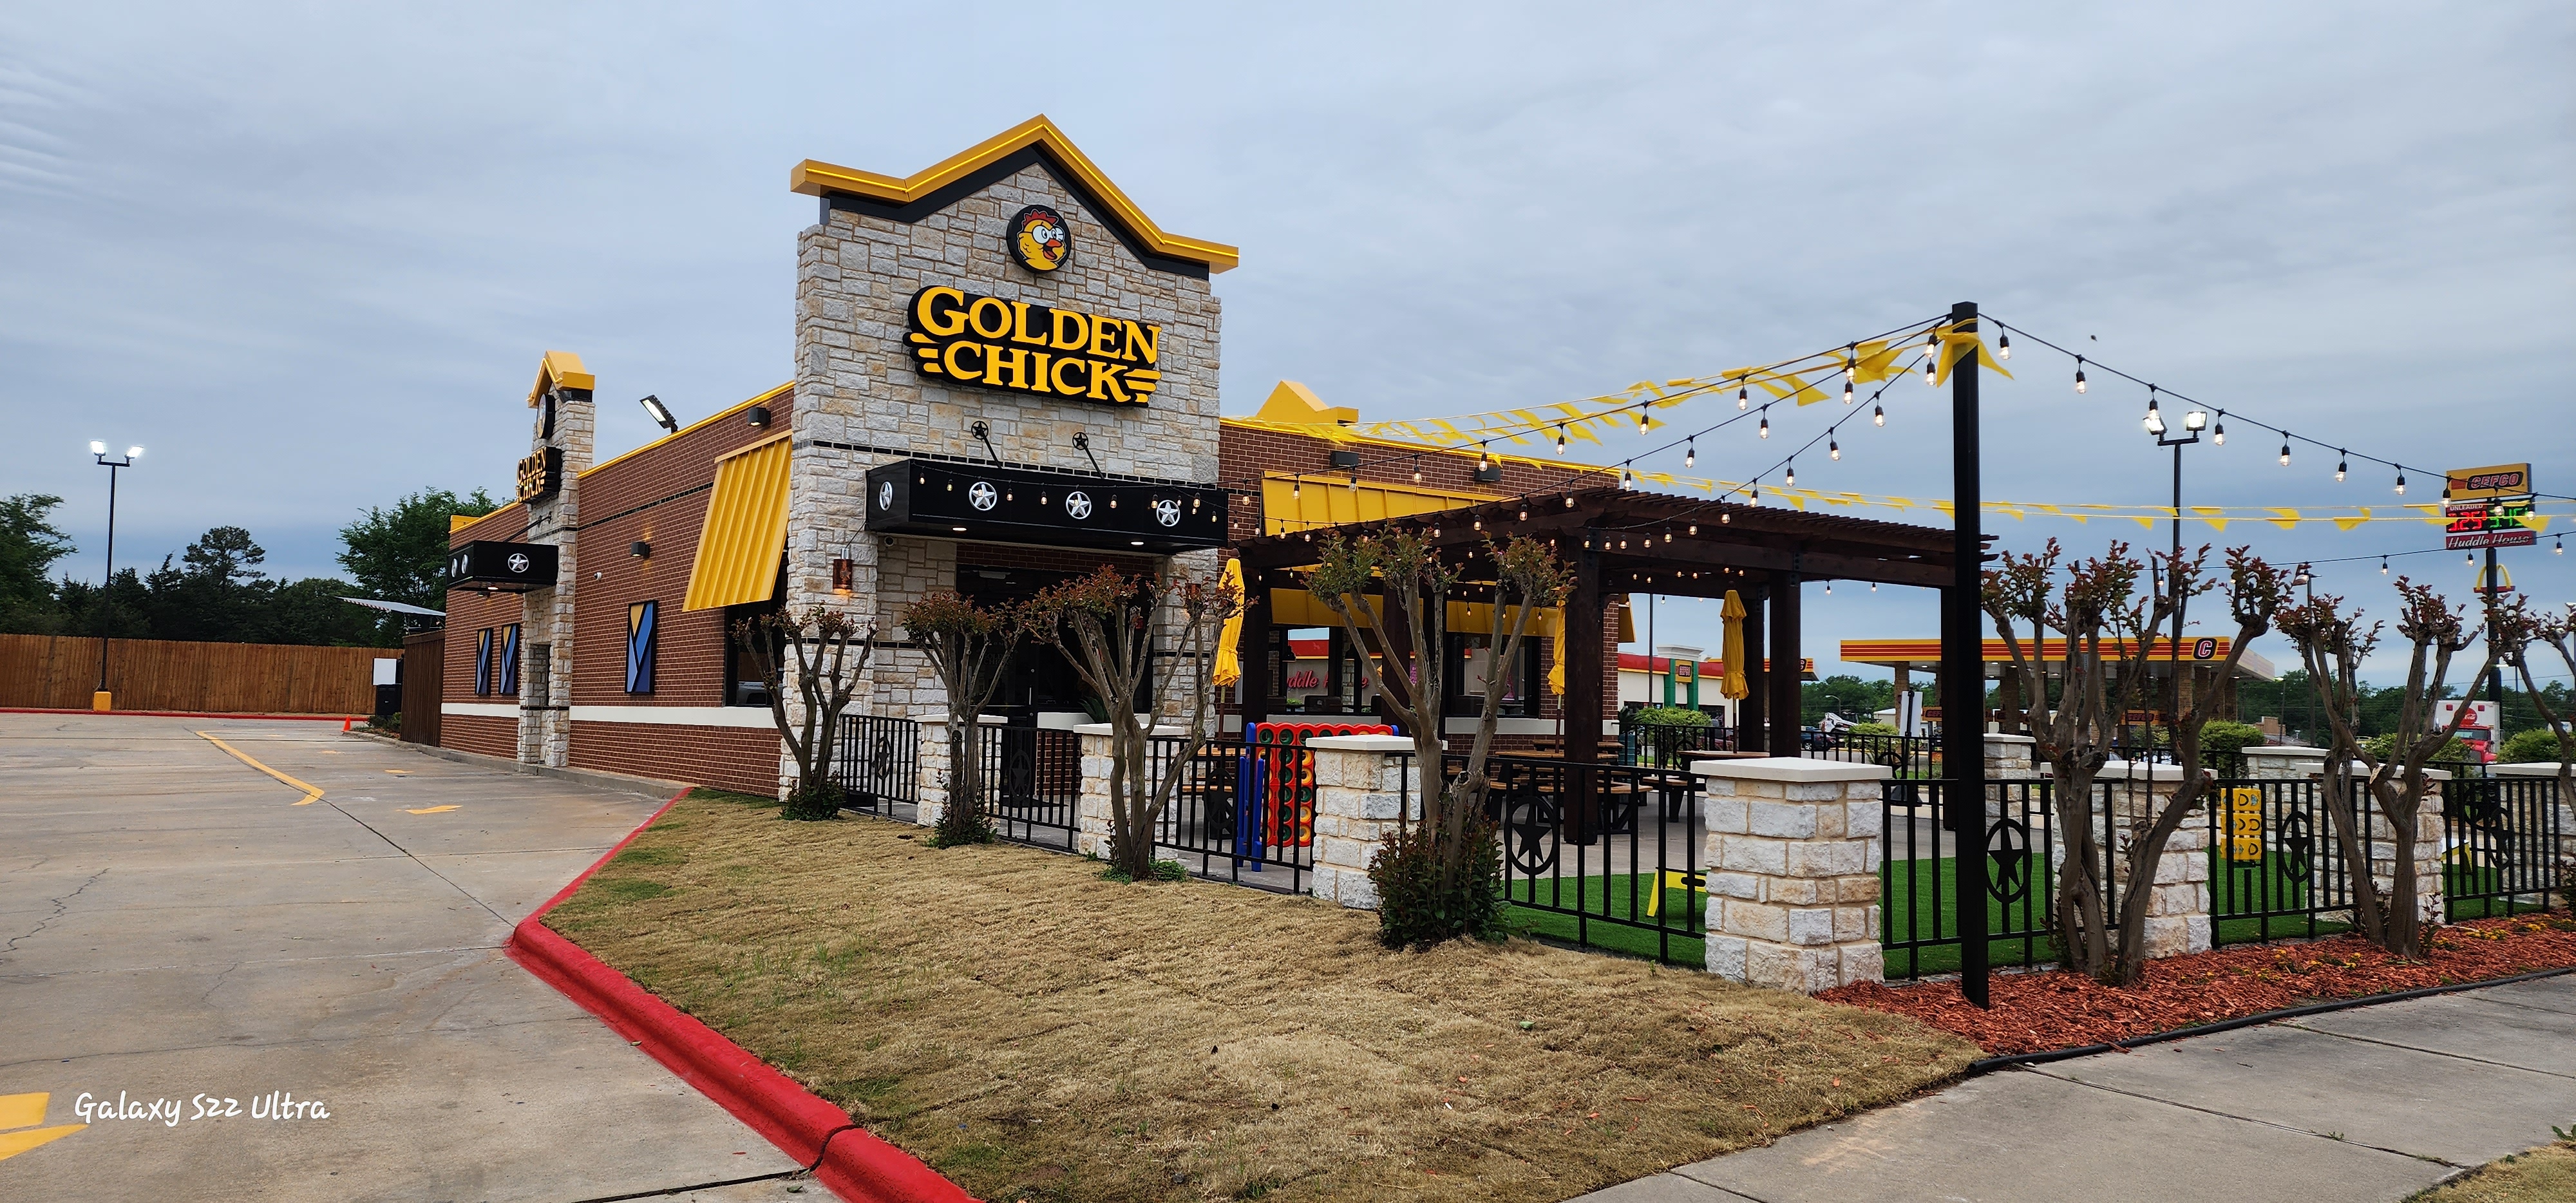 Golden Chick storefront.  Your local Golden Chick fast food restaurant in Mt. Vernon, Texas